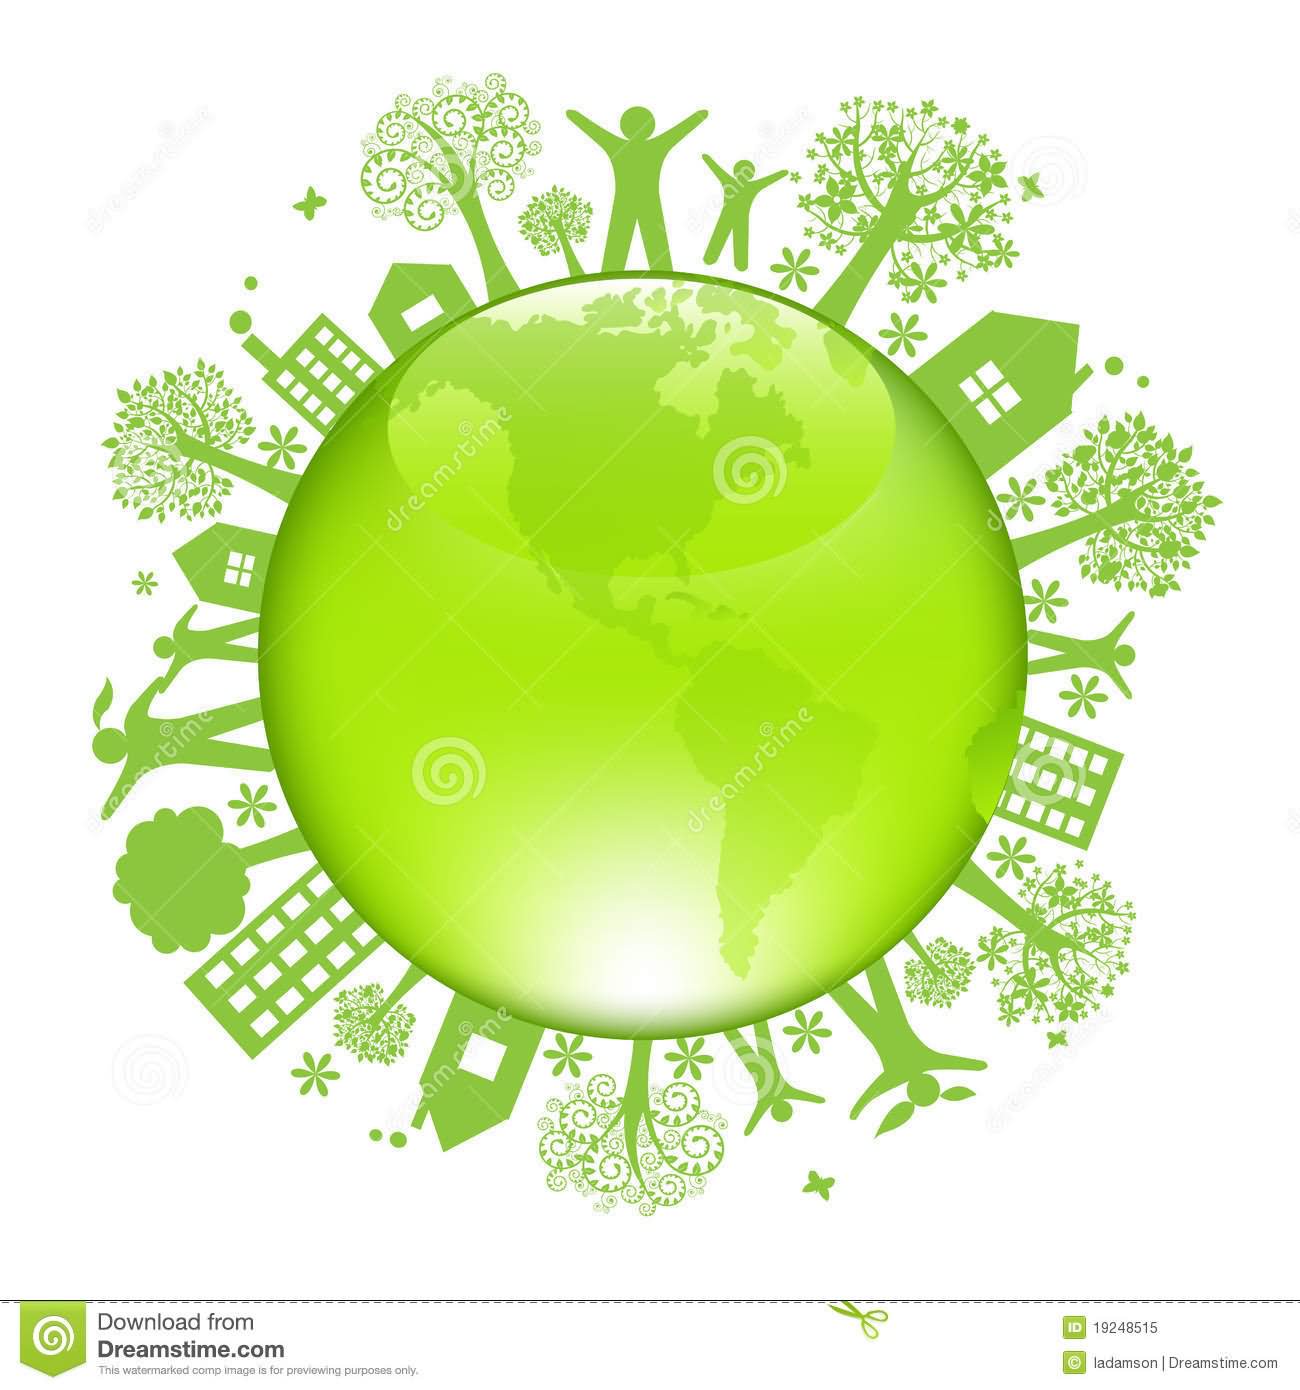 mother earth clip art free - photo #41